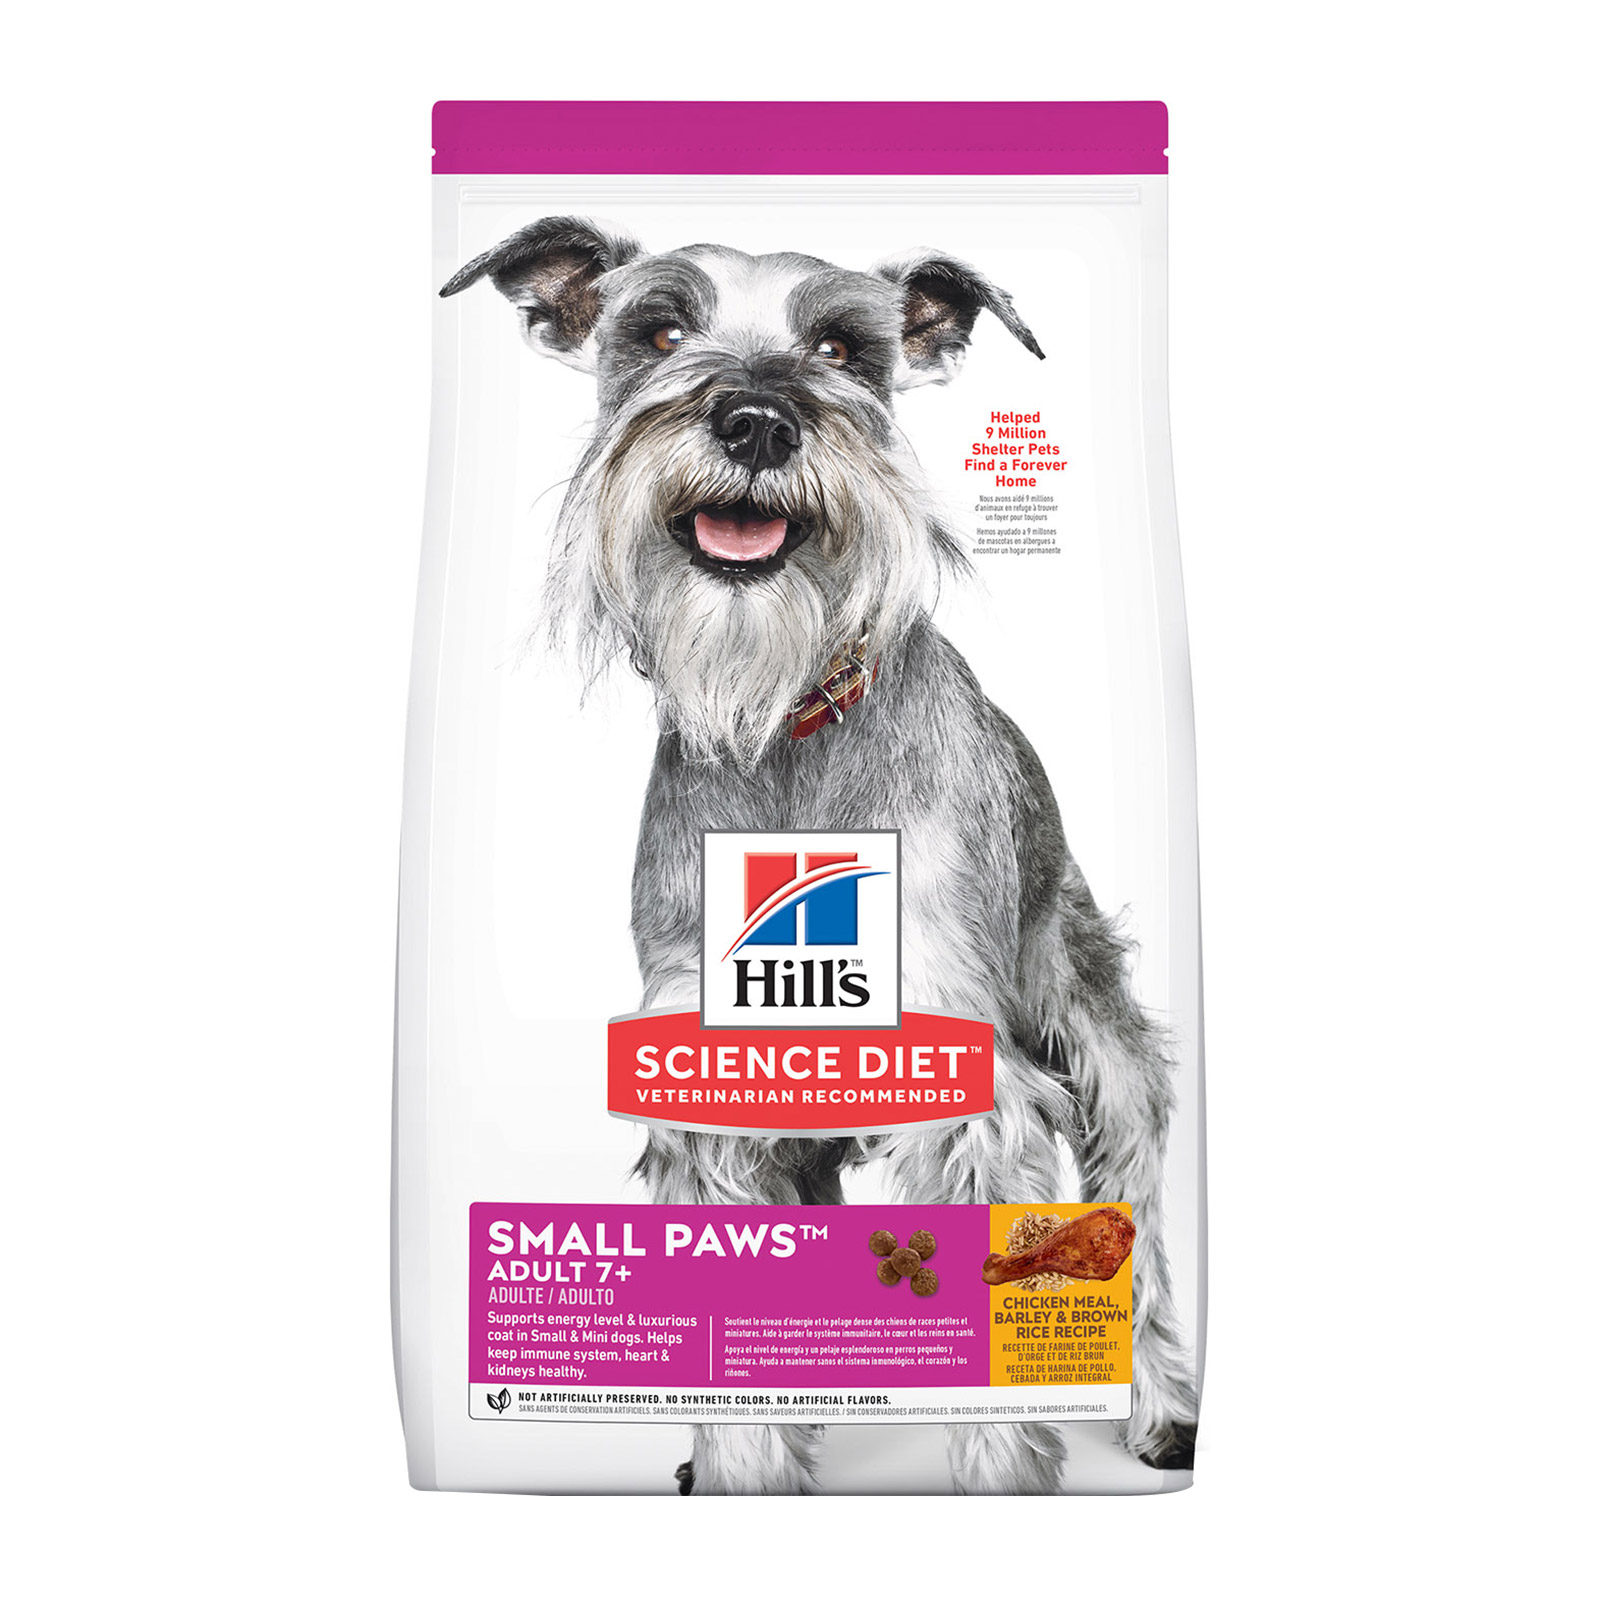 Hill's Science Diet Adult 7+ Small Paws Chicken, Barley & Rice Dry Dog Food 